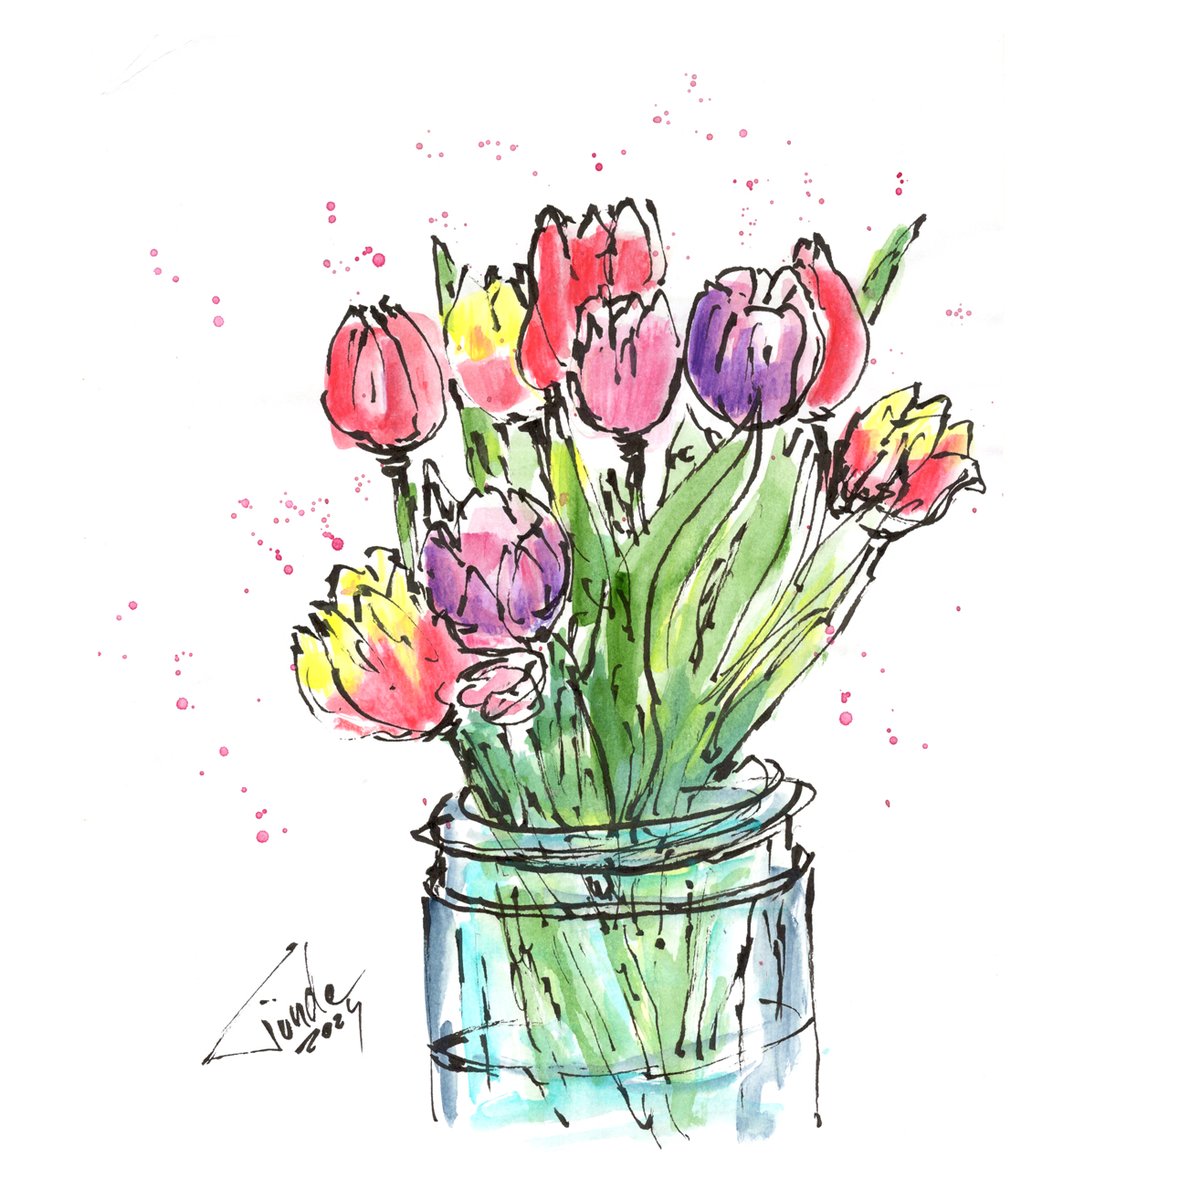 Spent a few minutes to sketch my bouquet of tulips. Love to sketch freely and quick, it keeps the lines more organic. For the wash I tested some water soluble pencils.

#tulips #flowers #nature #tundeart #artist #inksketch #colouredpencils #drawing #fudepen